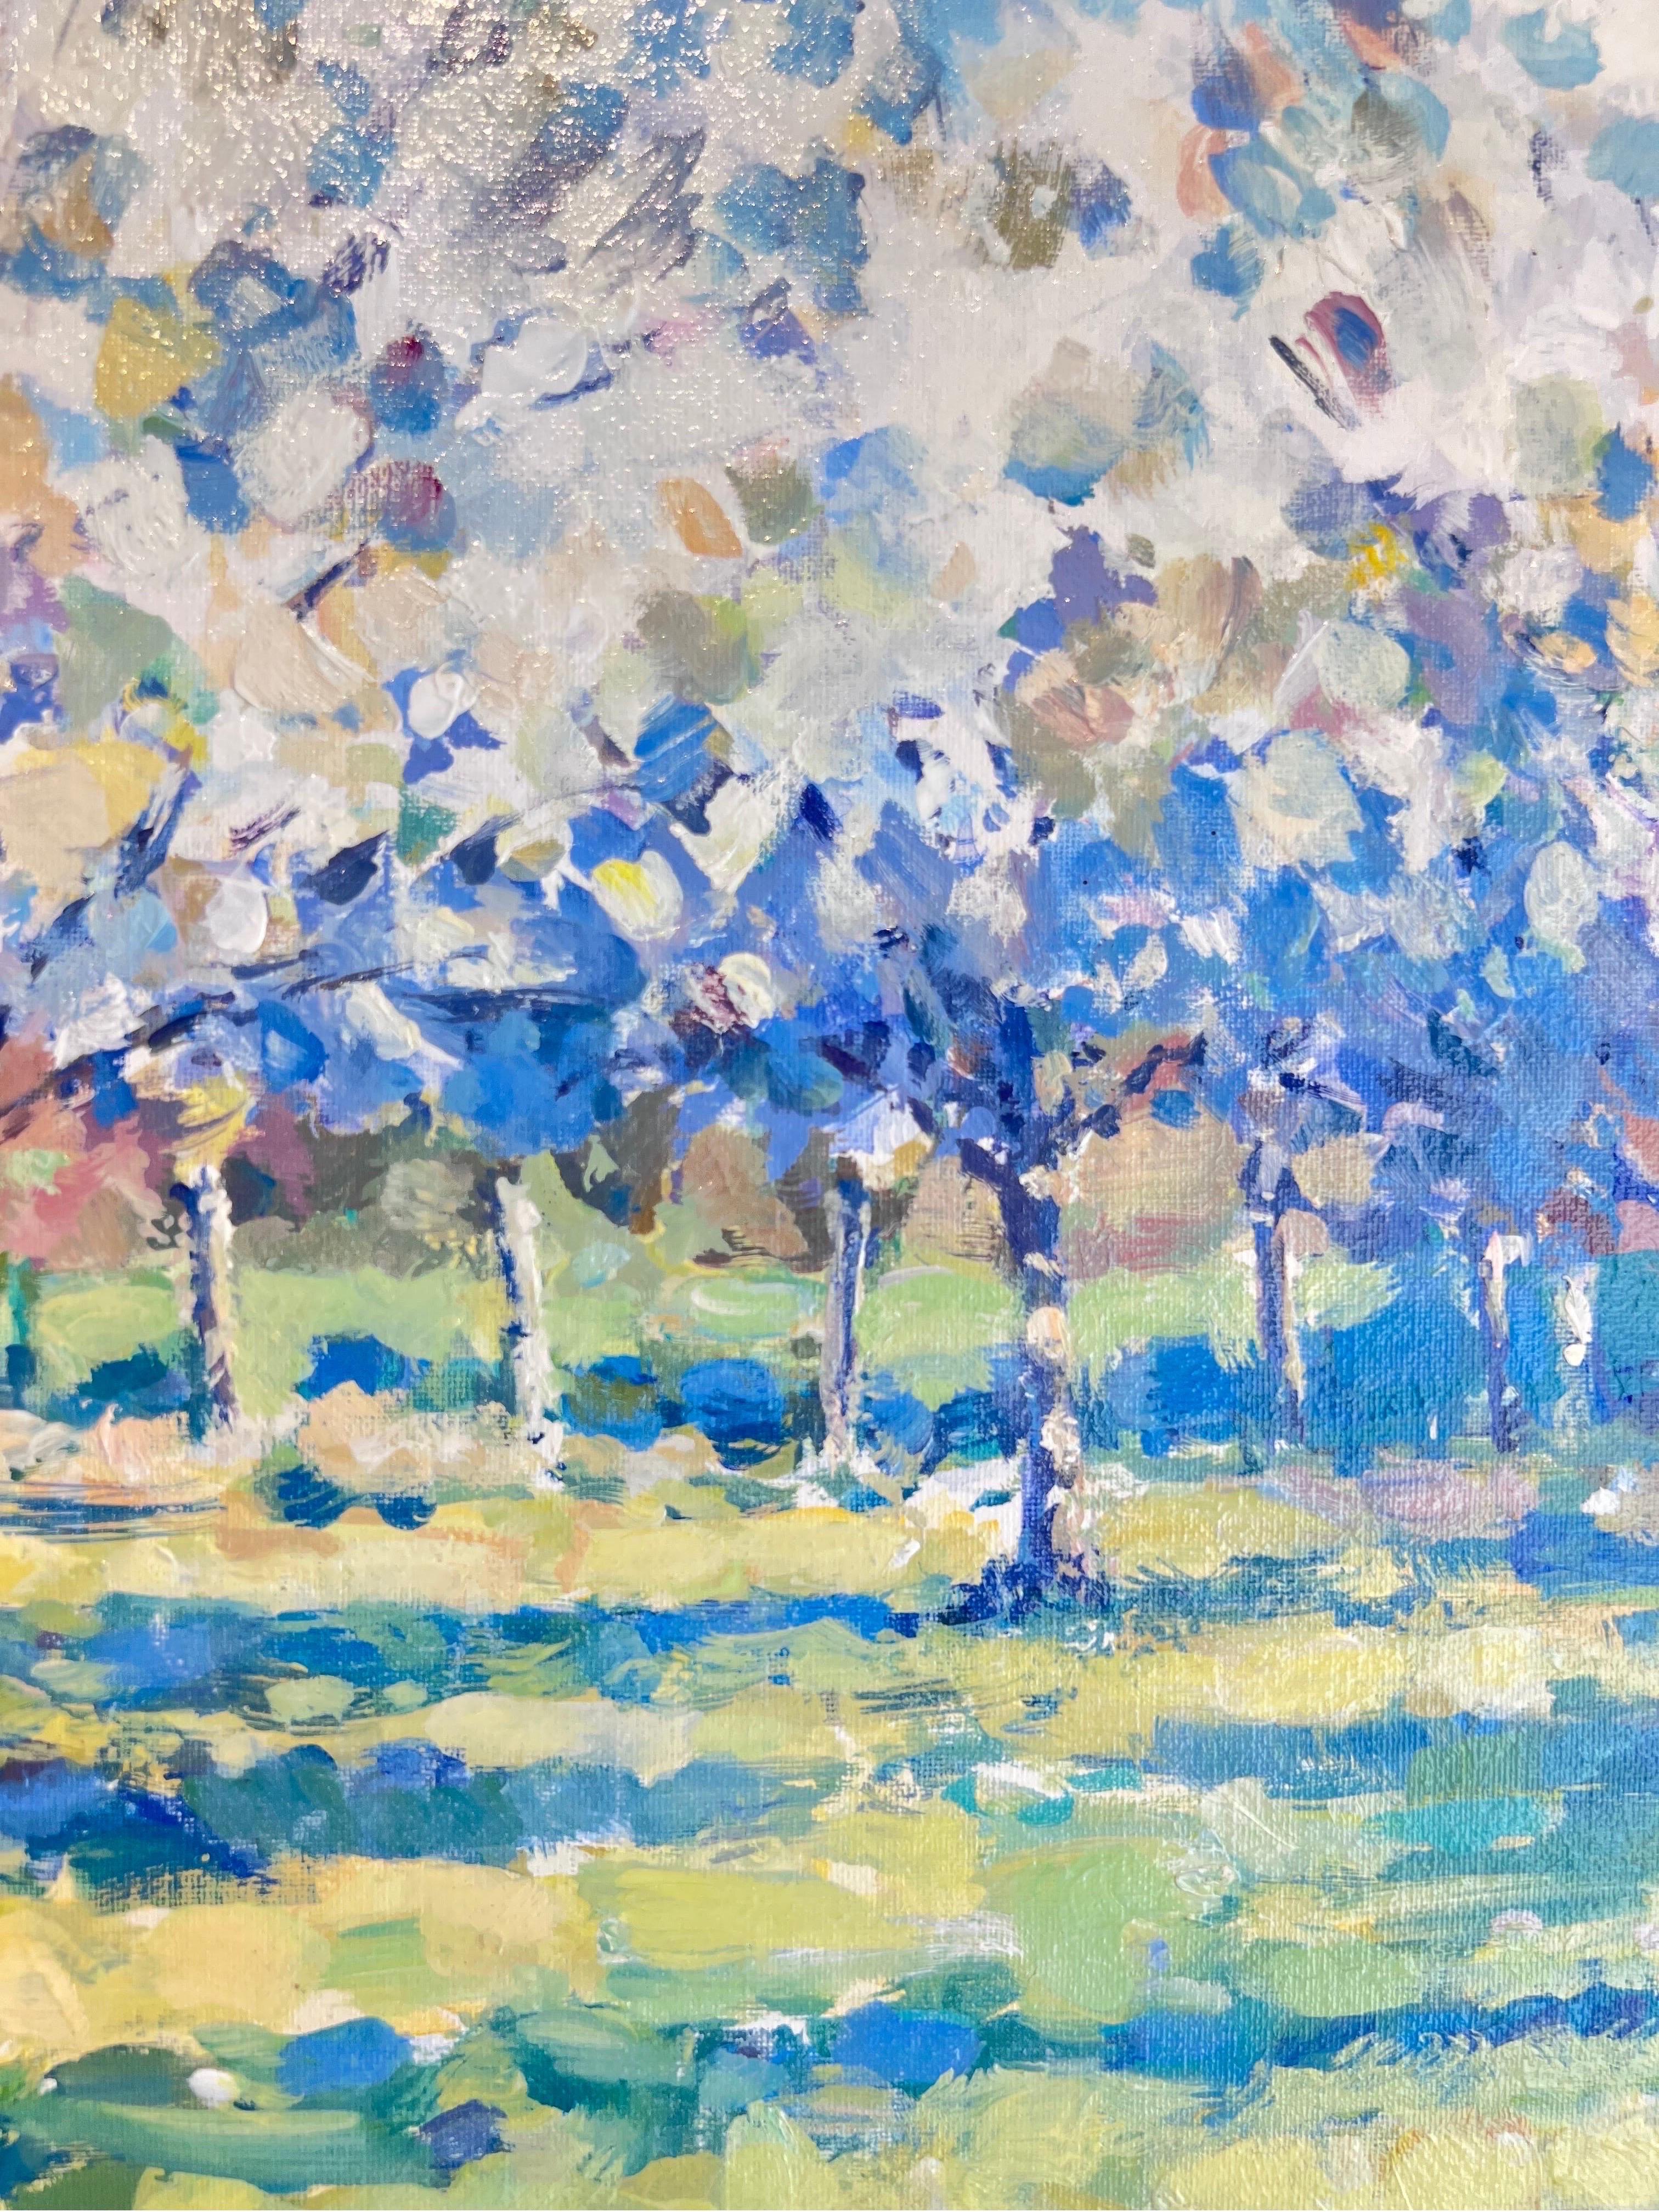 Orchard Blossom - original impressionism landscape painting-contemporary art - Impressionist Painting by David Farren